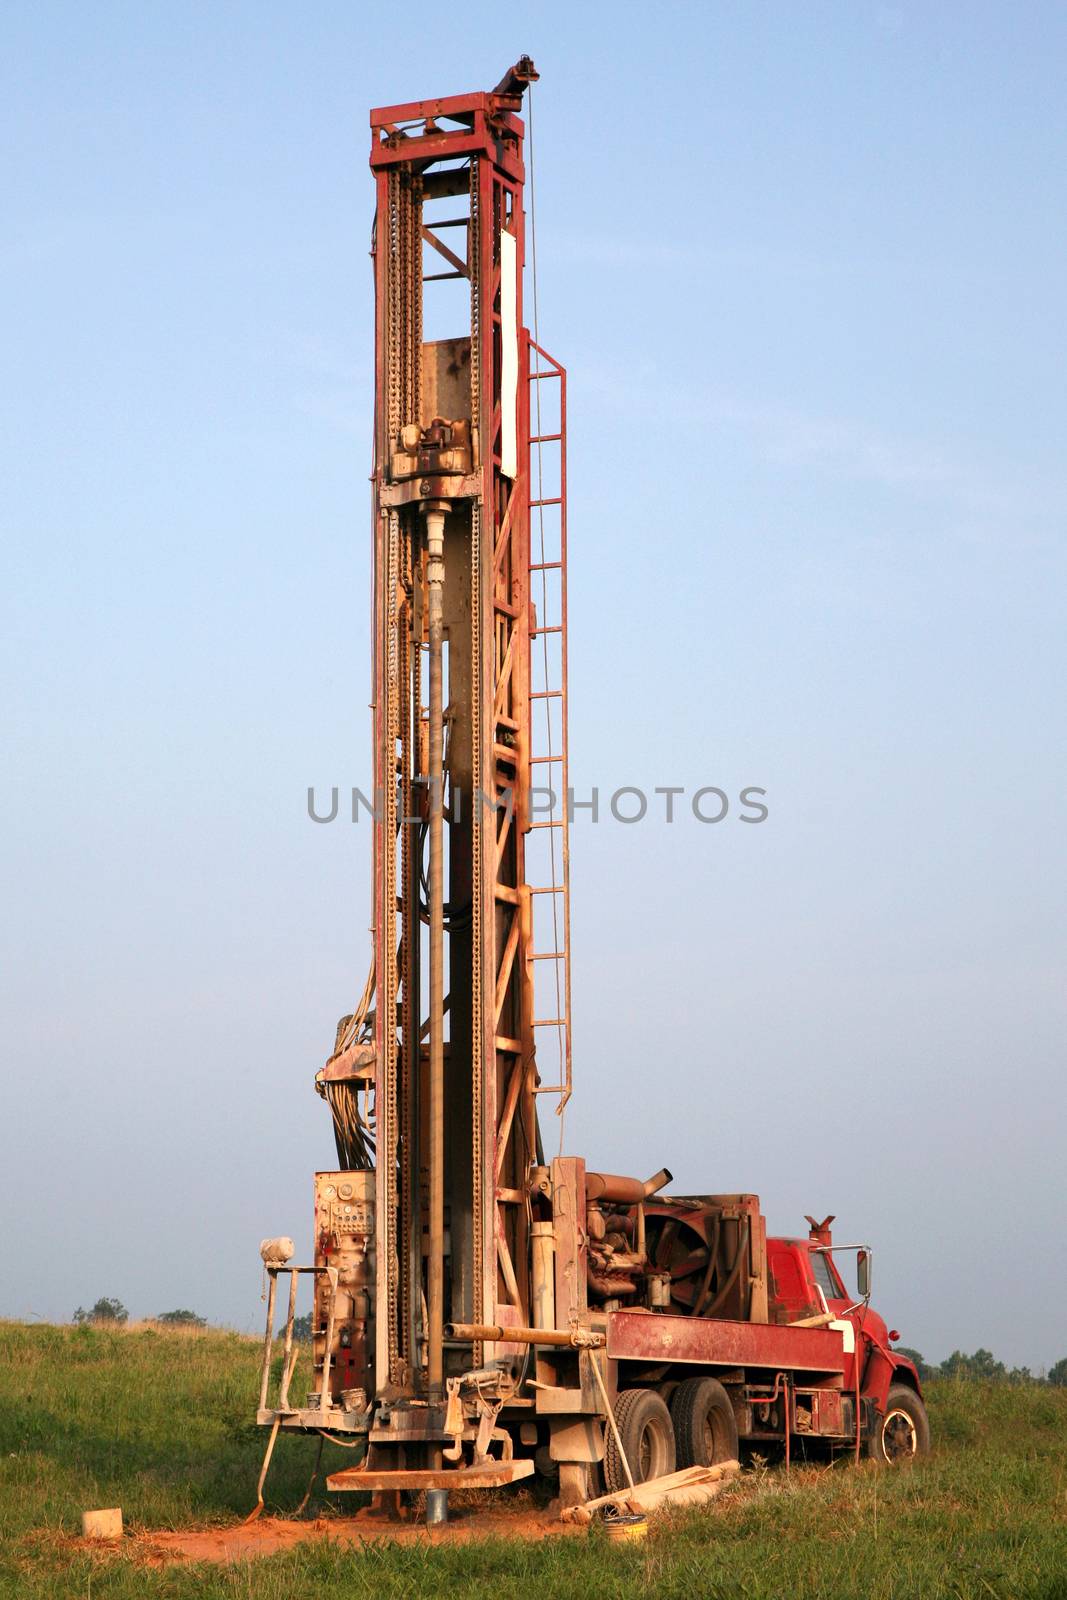 Drilling equipment to find a new source of fresh water.